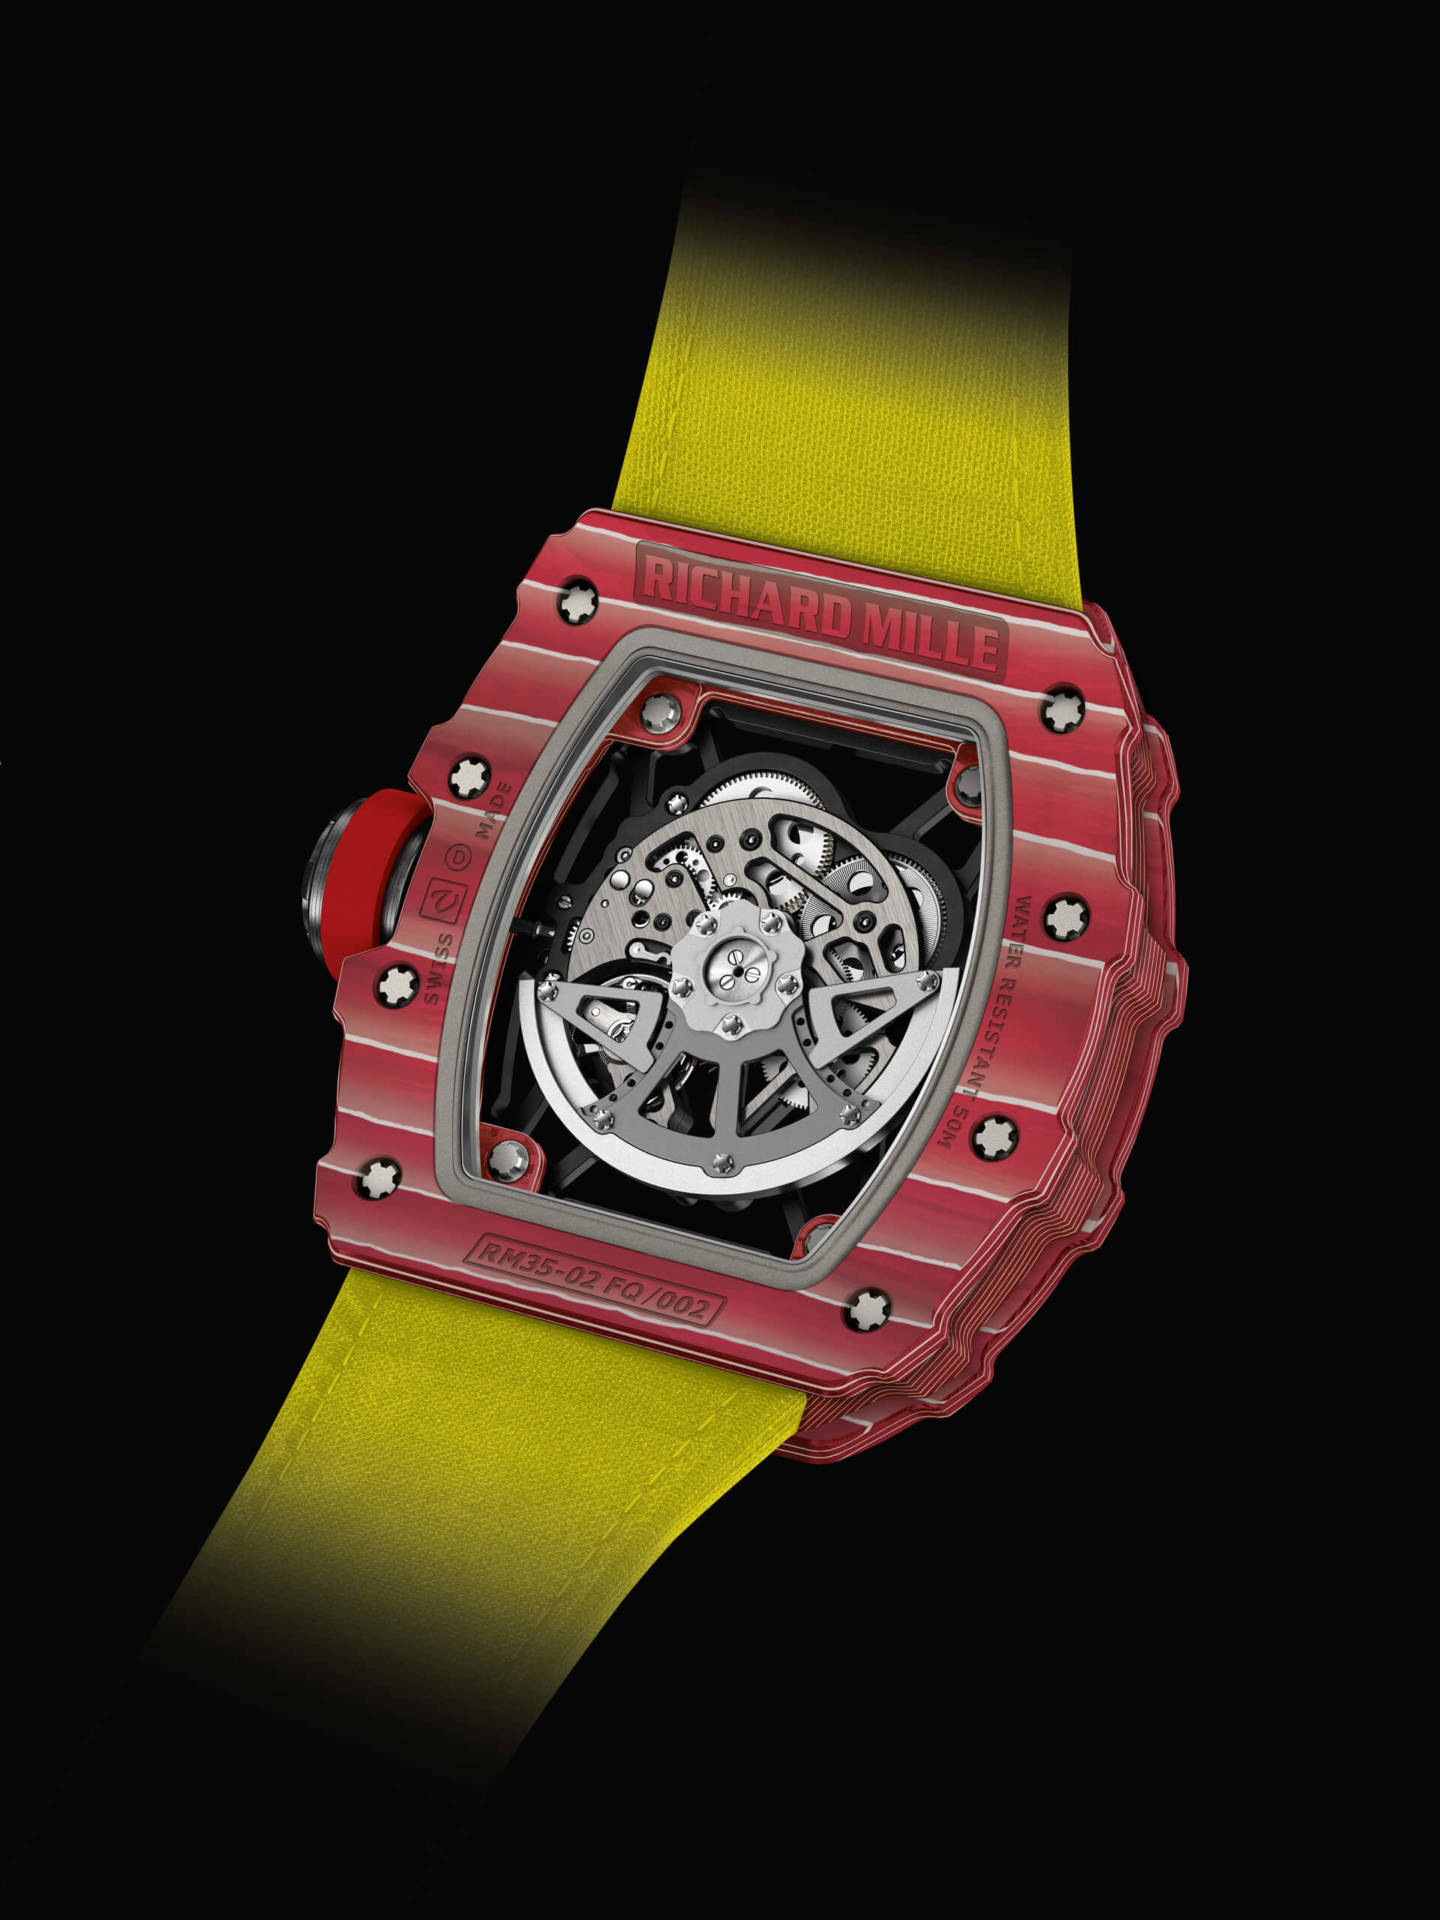 The Rafael Nadal RM35-02 Watch by Richard Mille